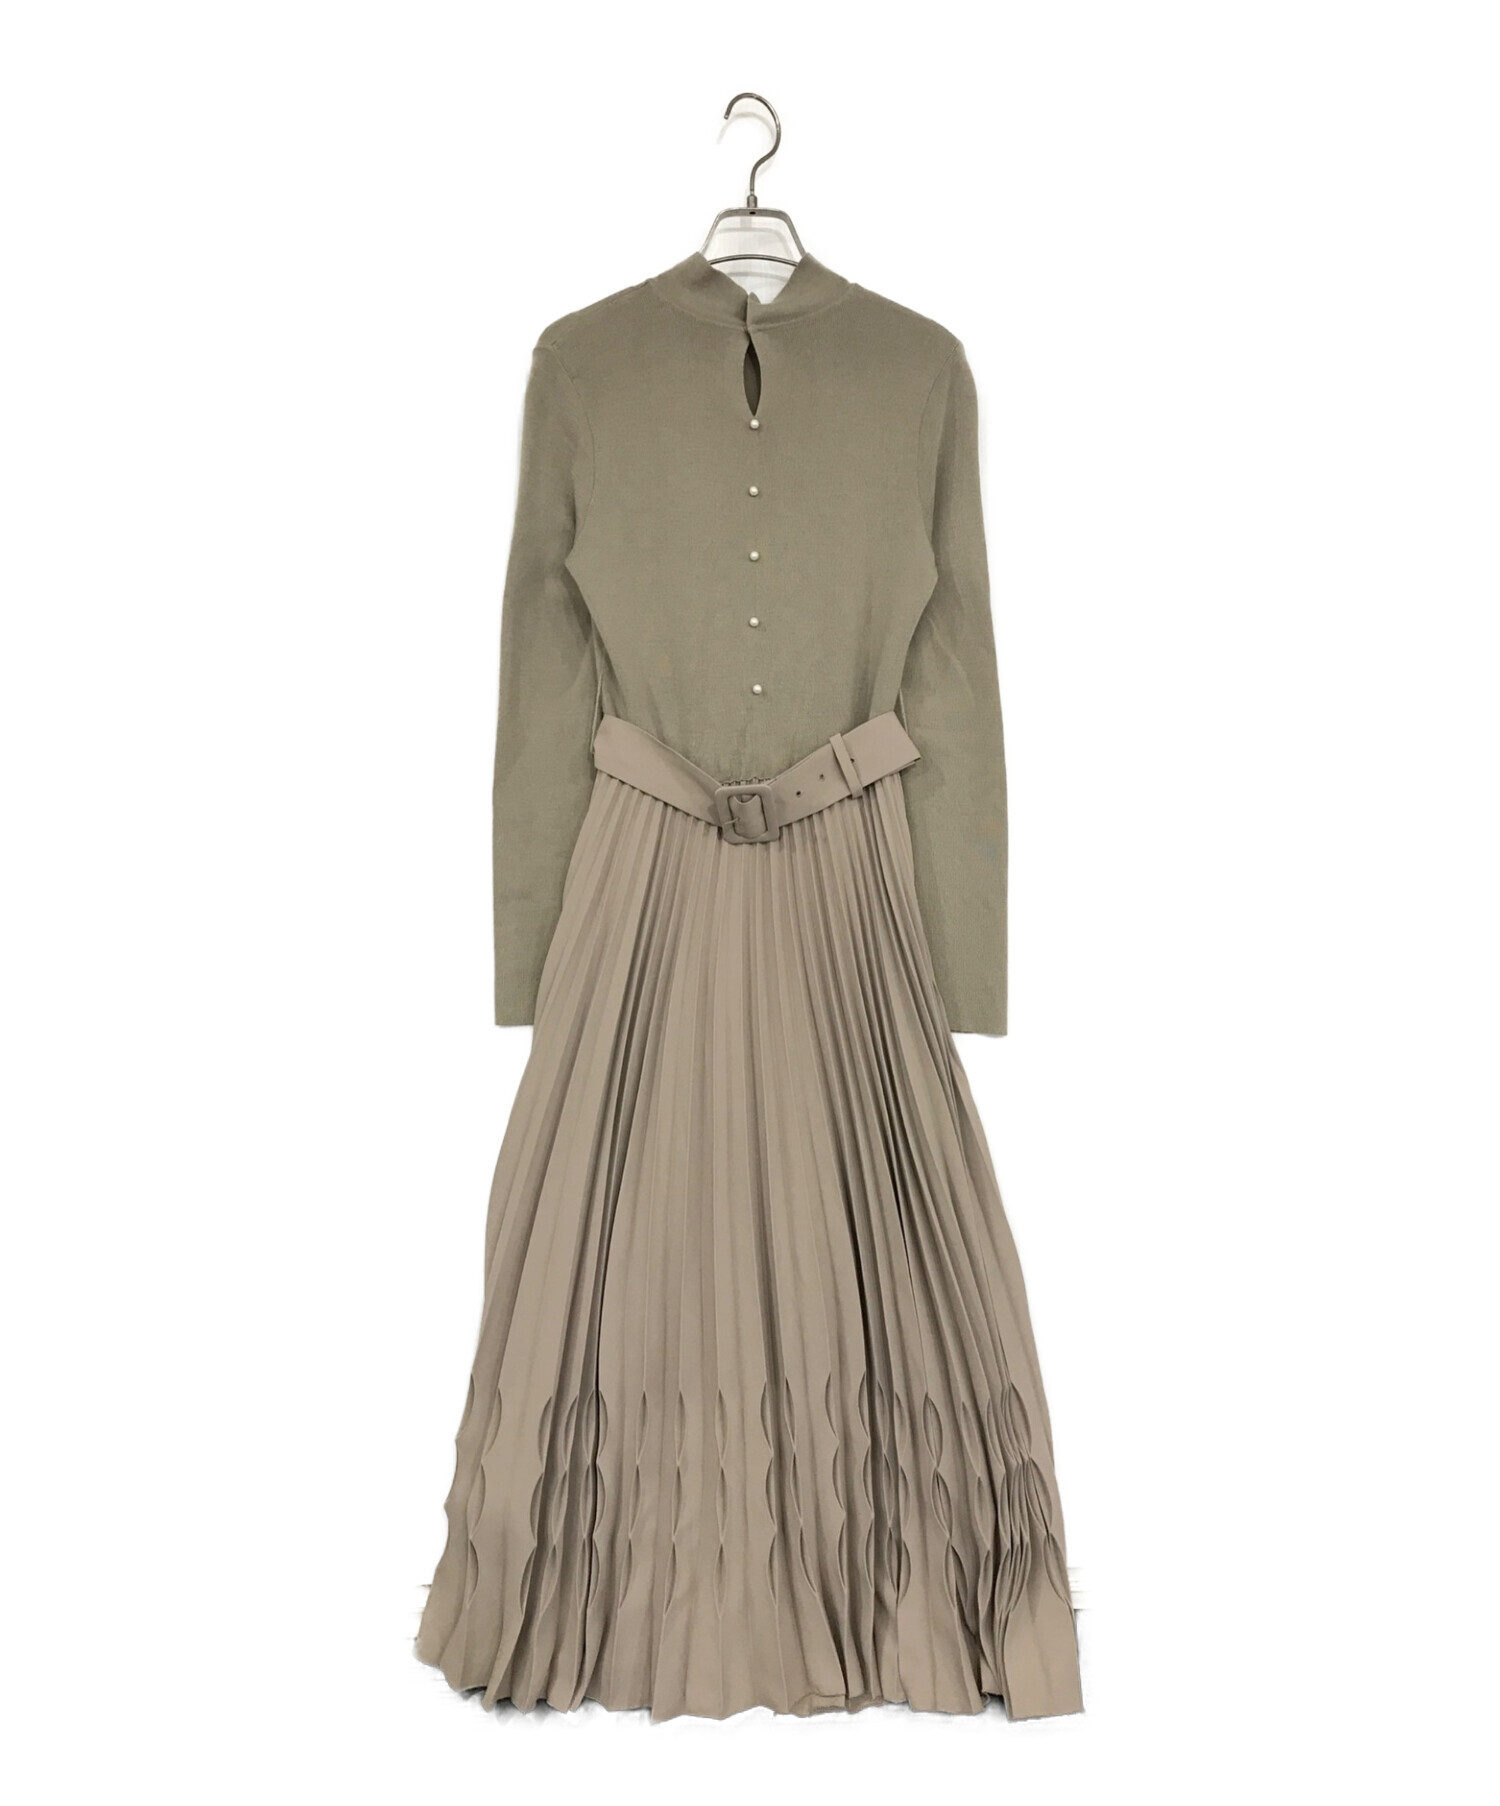 Her lip to pleated wool blend long dress